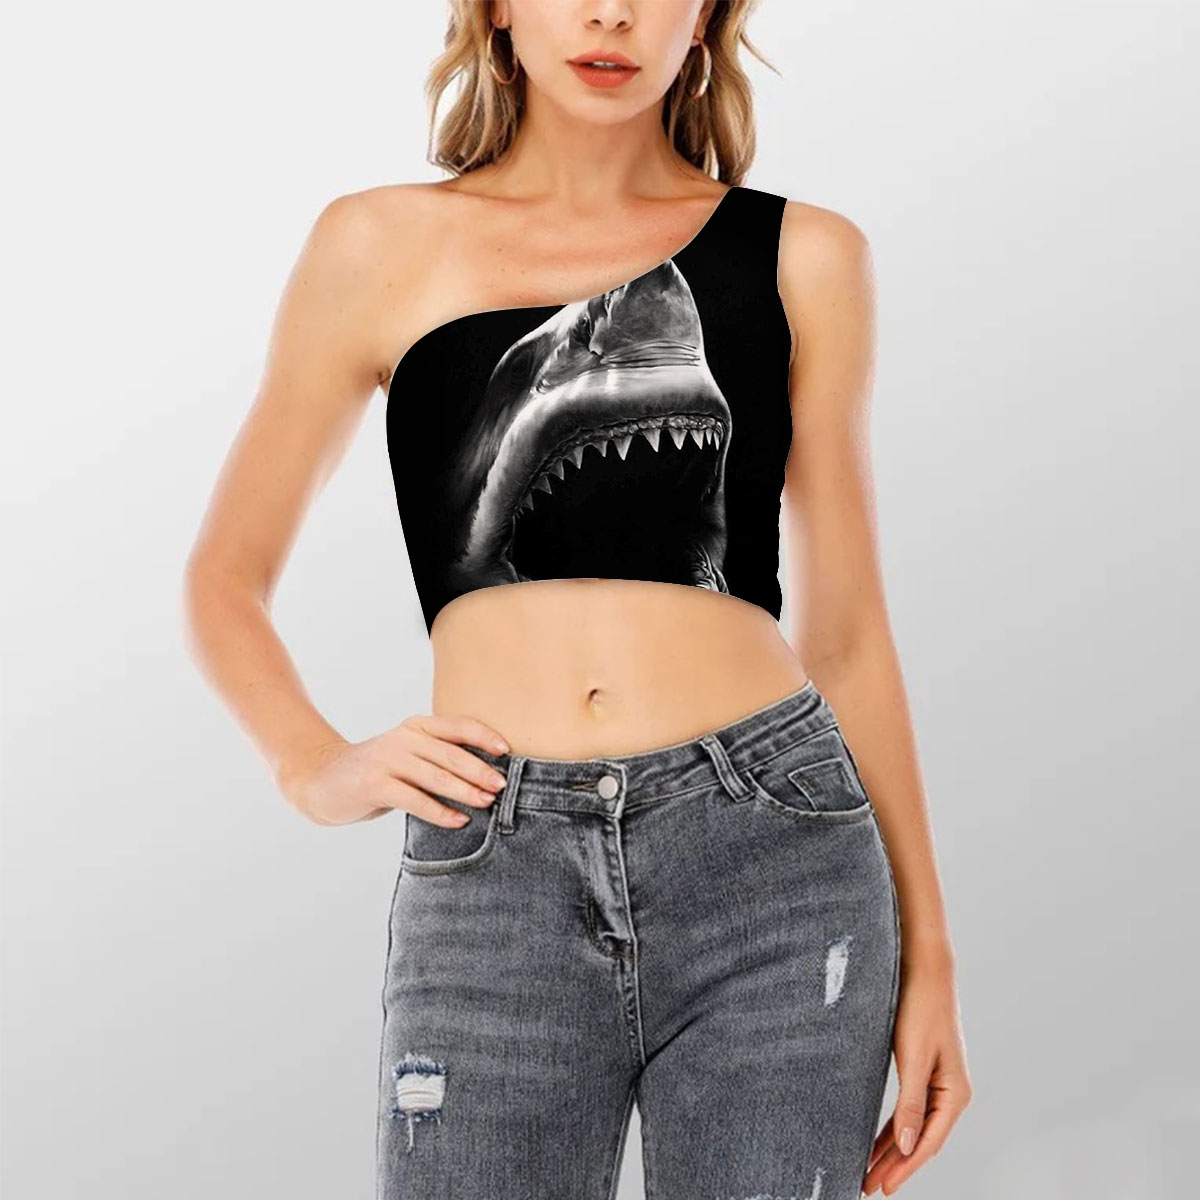 Jaw Great White Shark Shoulder Cropped Top